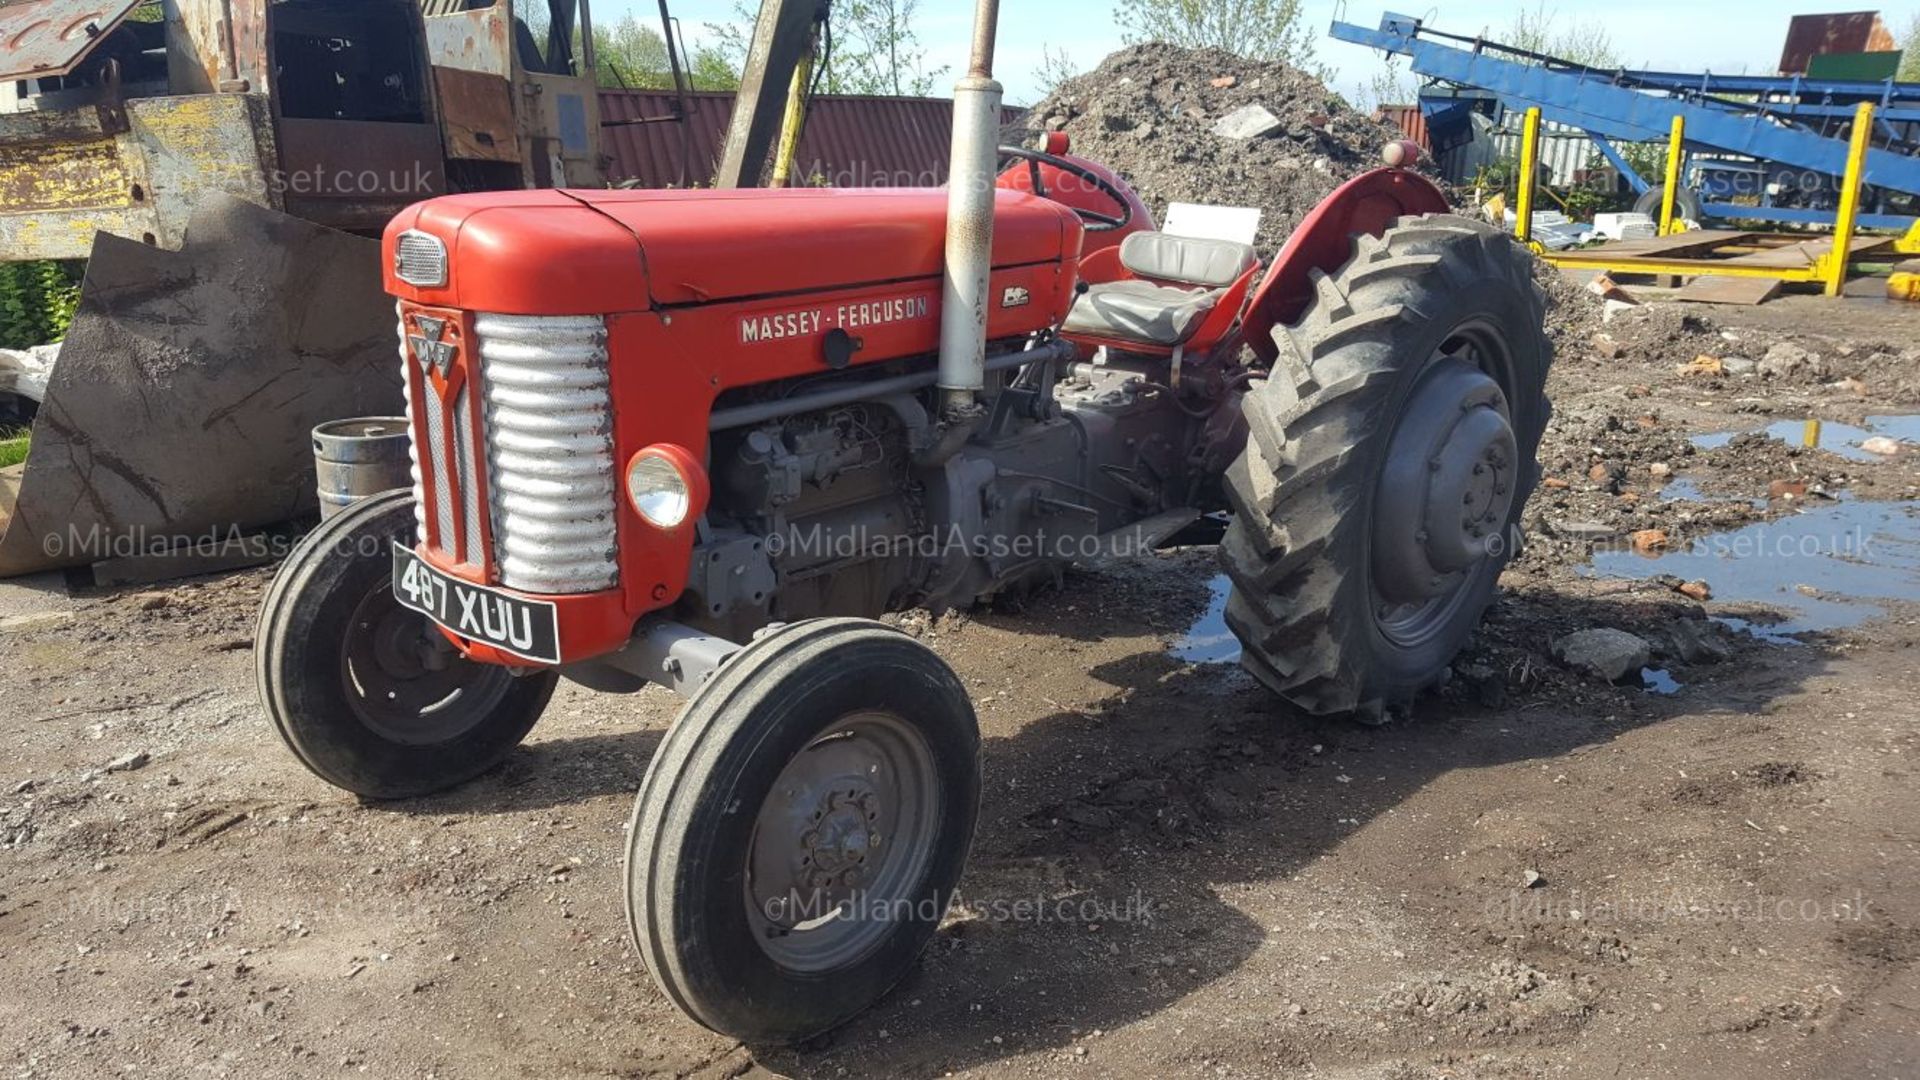 1959 MASSEY FERGUSON 65 DIESEL TRACTOR. STARTS, DRIVES AND PTO TURNS 2WD *NO VAT* - Image 10 of 10